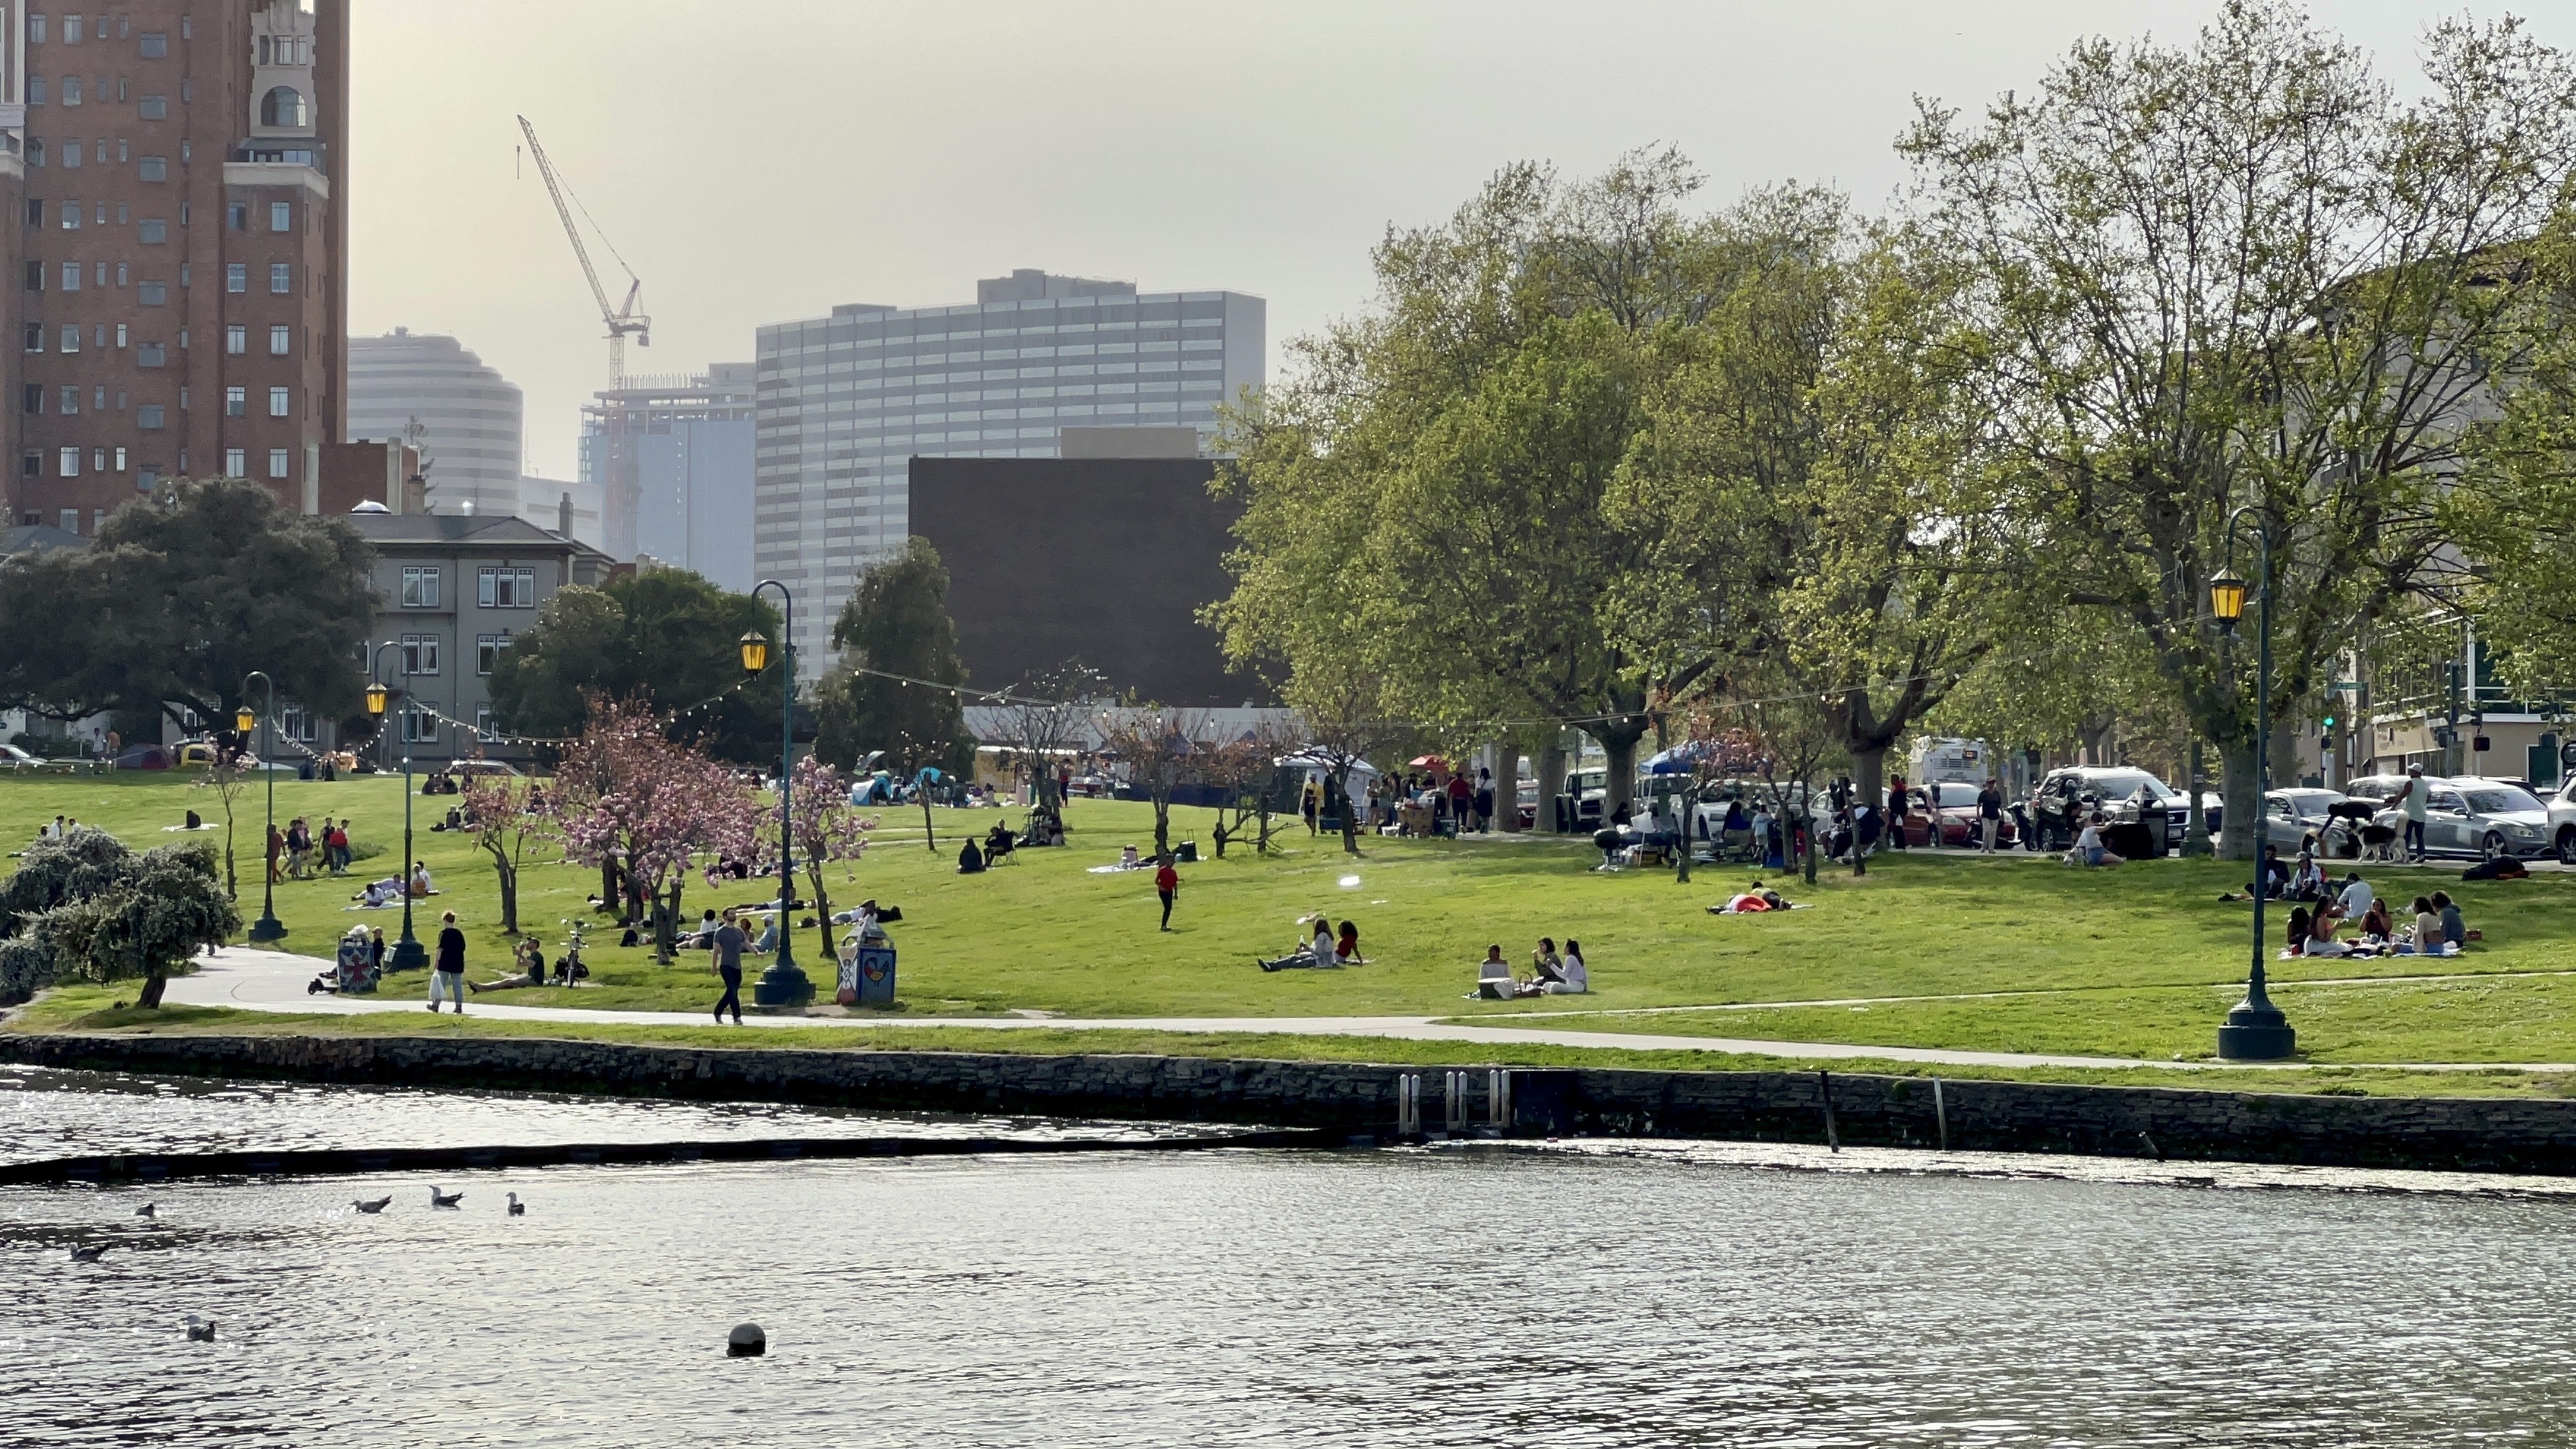 Distance shot of part of Lake Merritt, with buildings in the background, people sitting on law, walking on path on an overcast day.